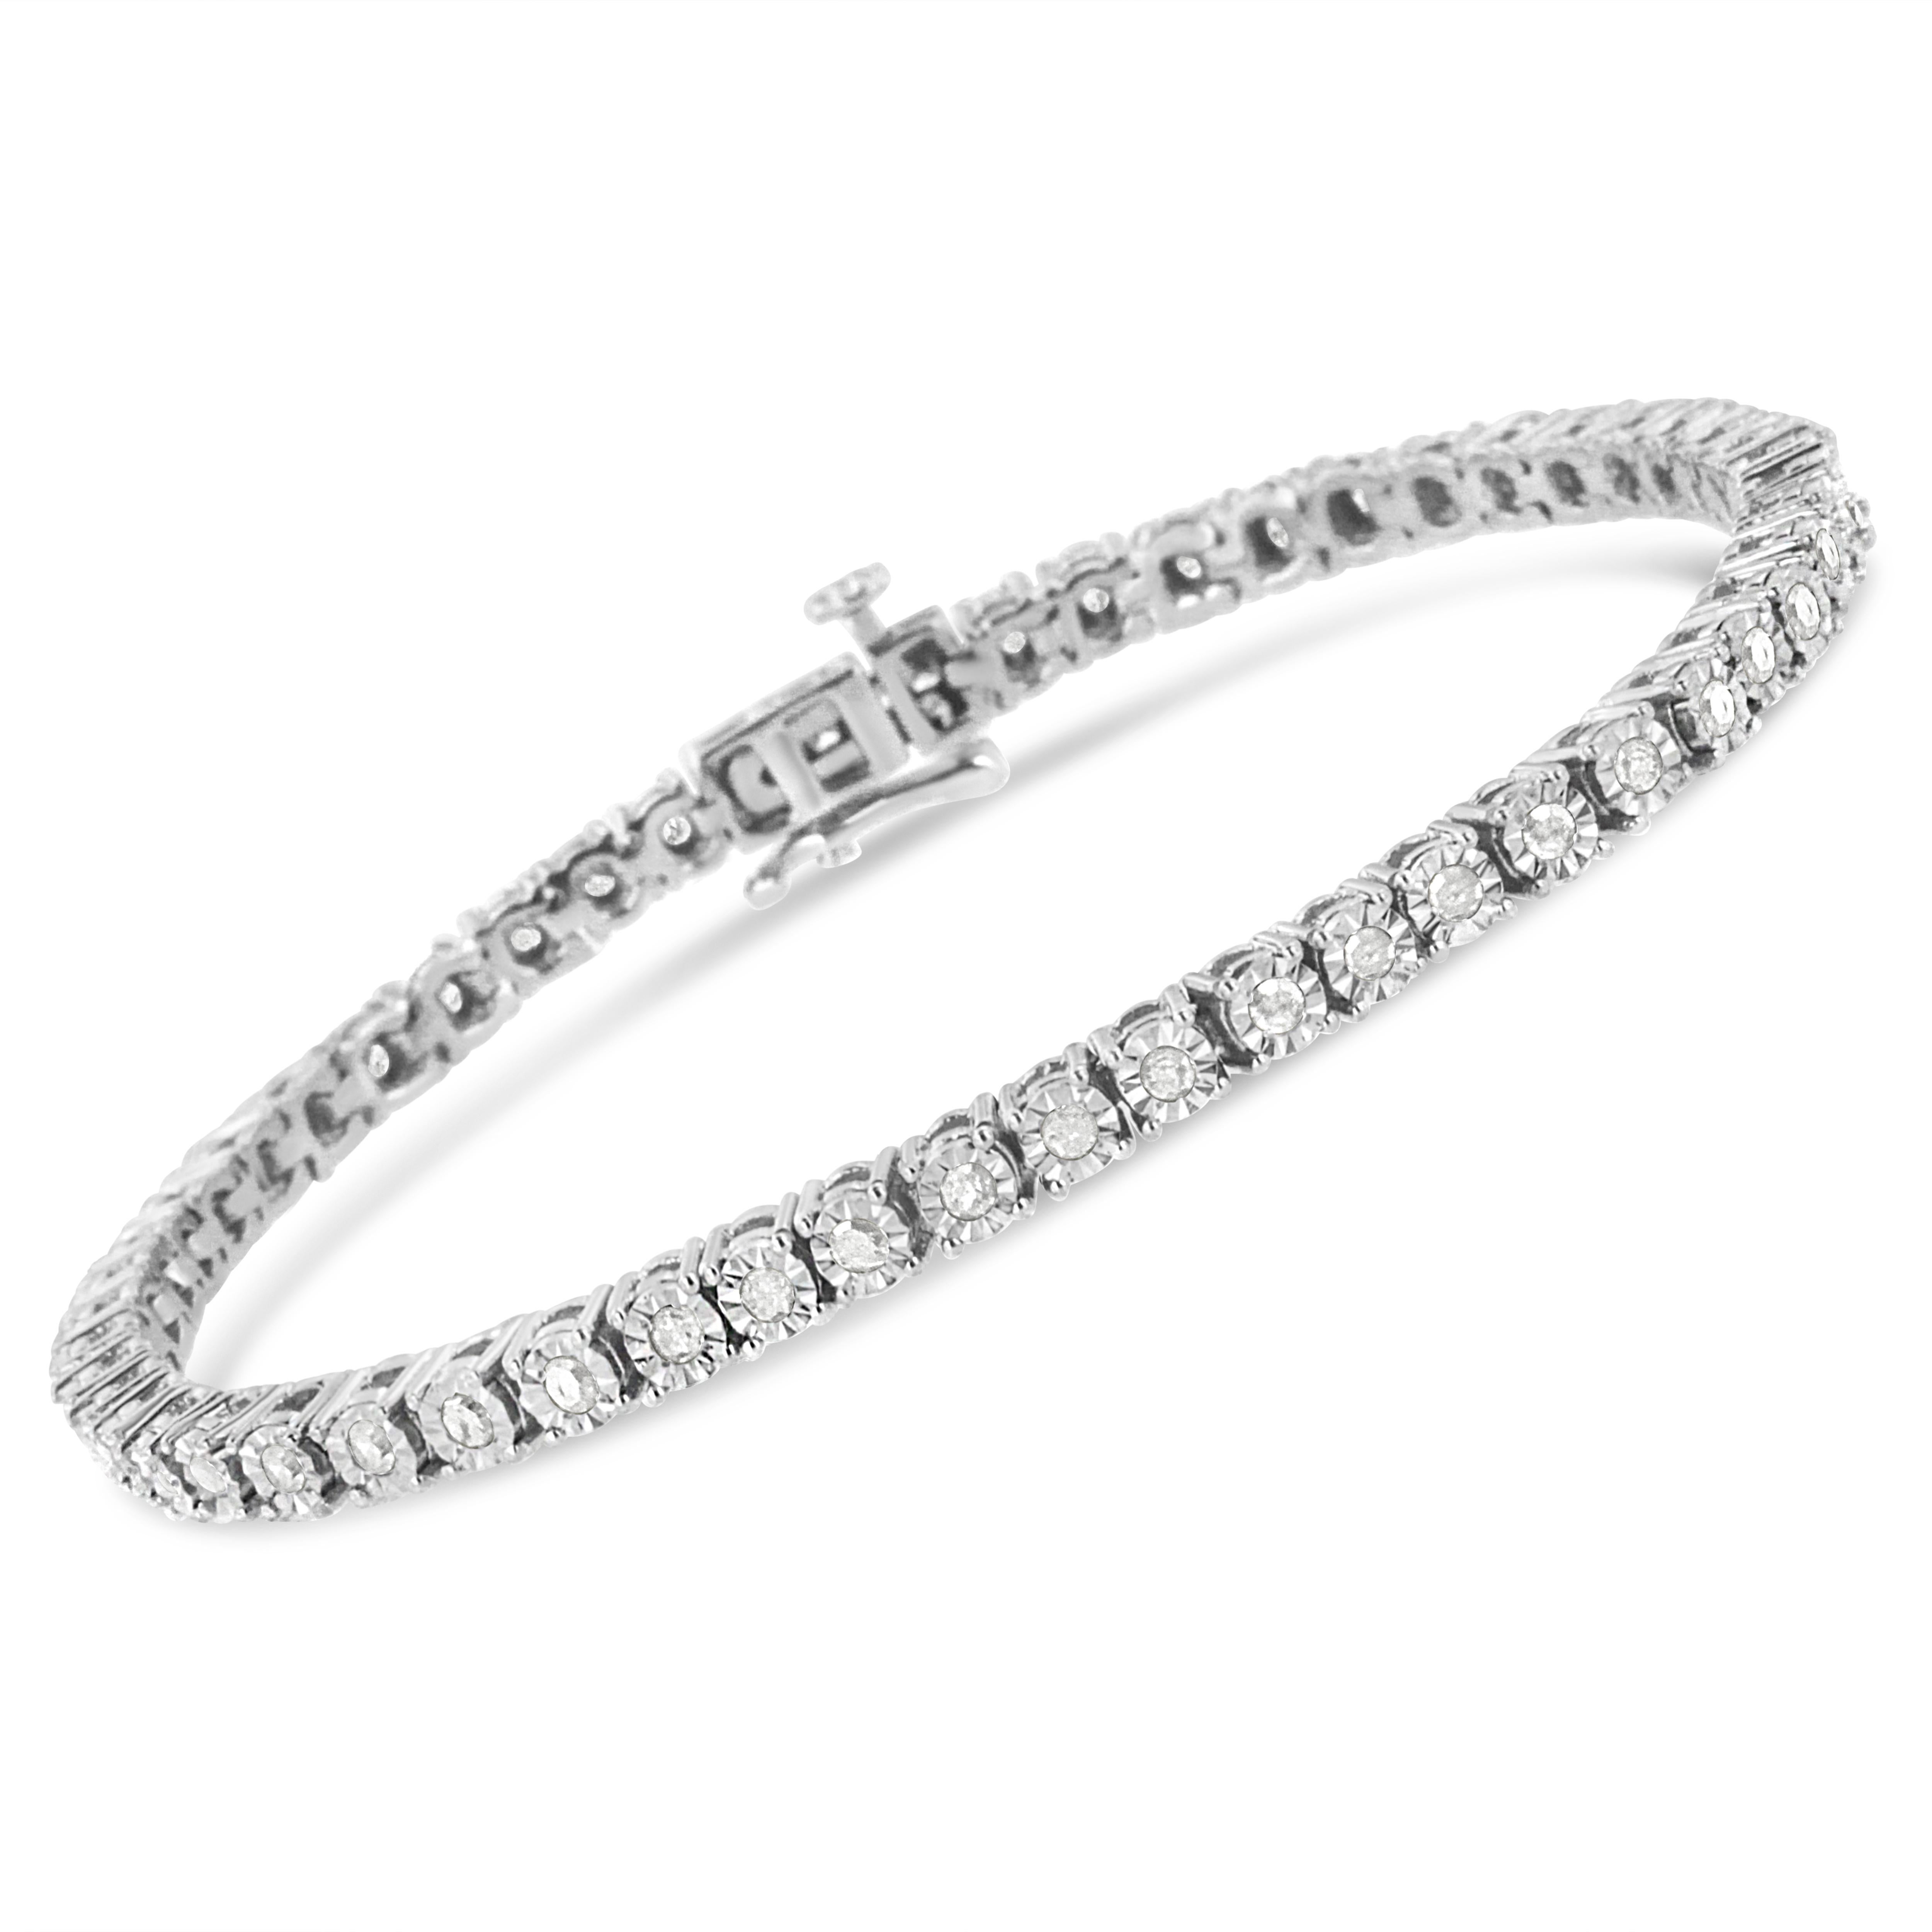 This feminine and luxe tennis bracelet is made up of the most lovely, multifaceted rose cut diamonds, reminiscent of vintage-era Art Deco jewelry style. Set in real, solid .925 sterling silver links for a timeless style, in your choice of precious